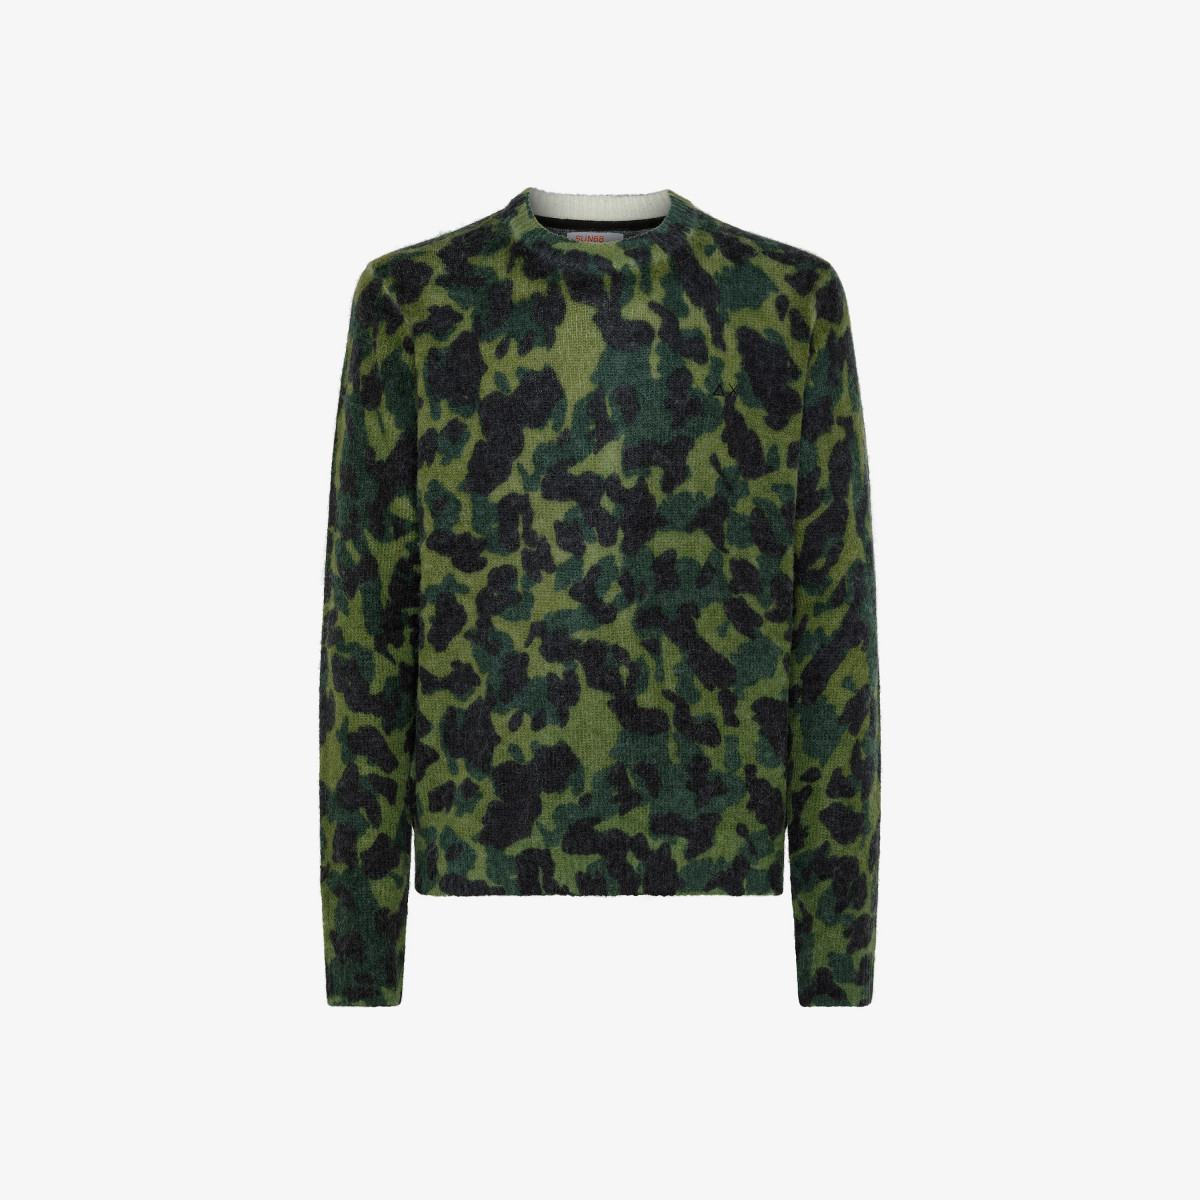 ROUND PRINT ALL OVER MILITARY